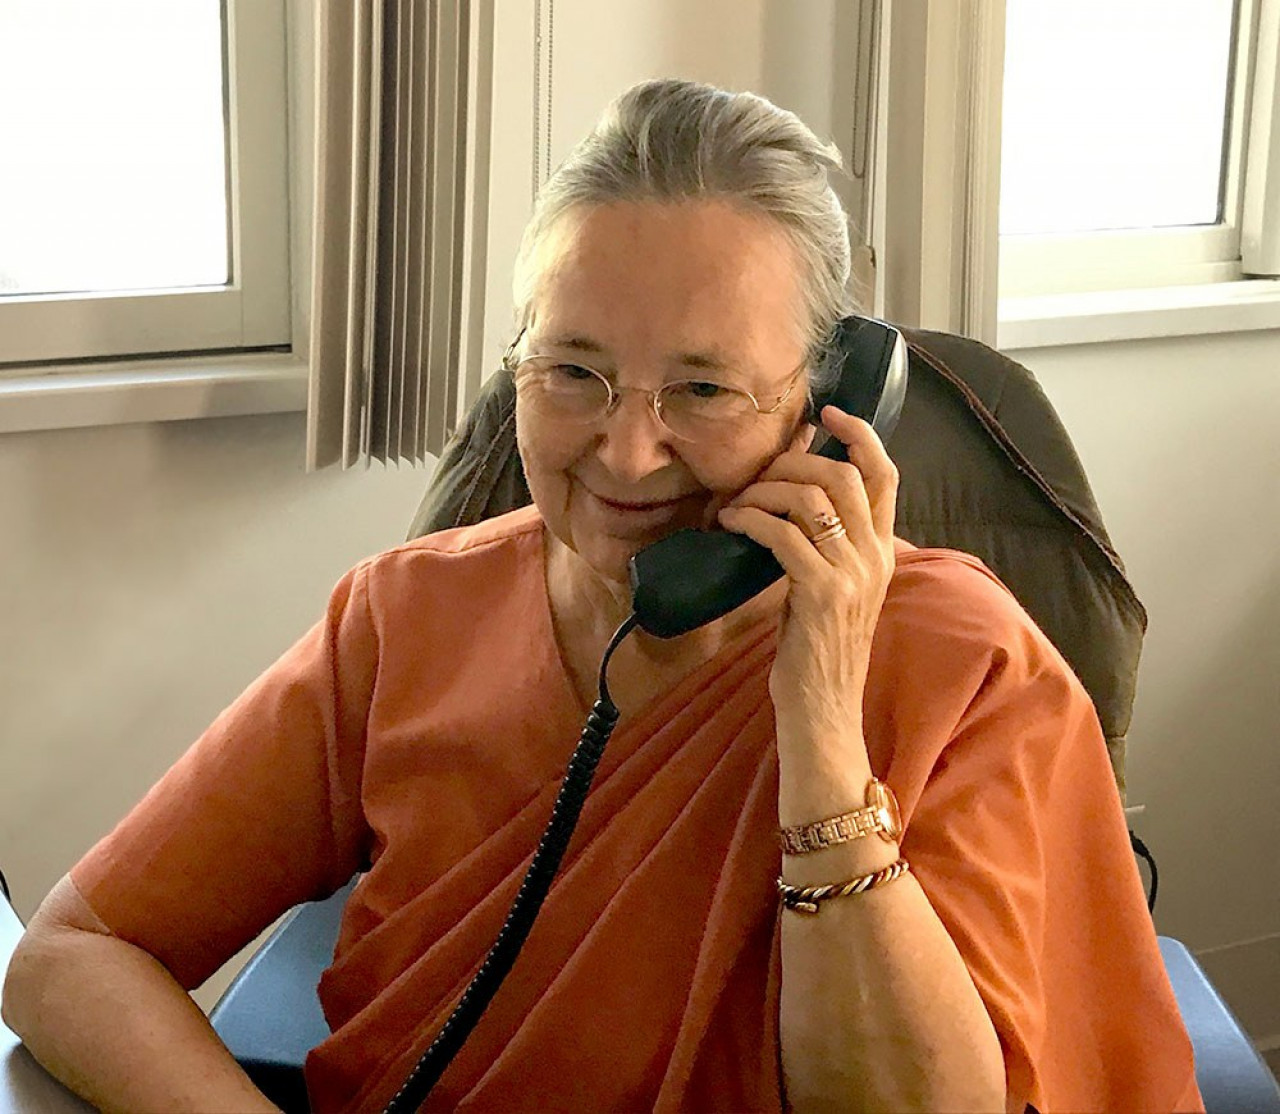 SRF nun counsels over phone